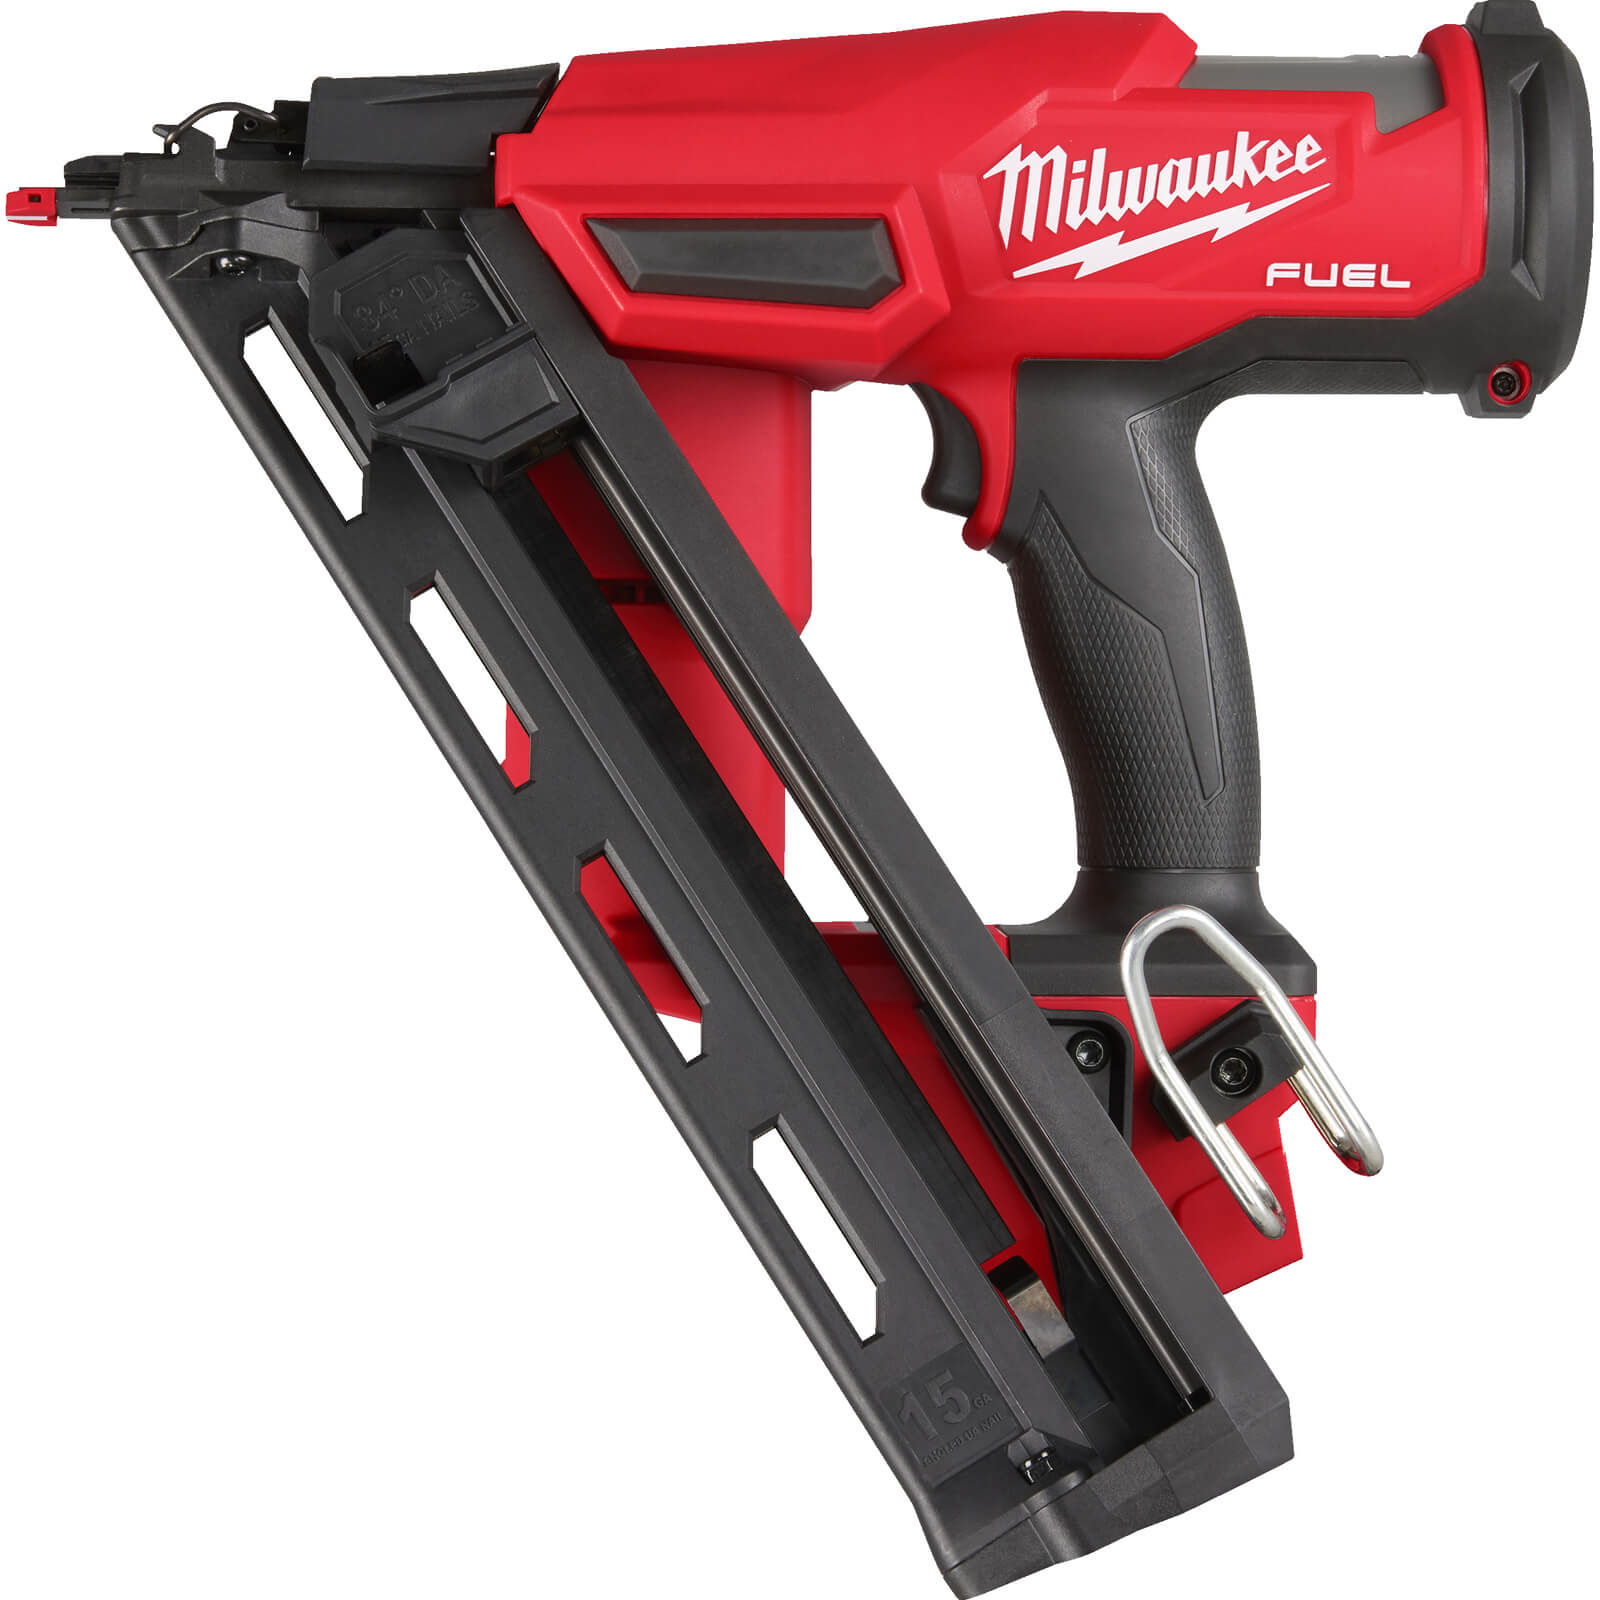 Image of Milwaukee M18 FN15GA Fuel 18v Cordless Brushless 15 Gauge 2nd Fix Nail Gun No Batteries No Charger Case